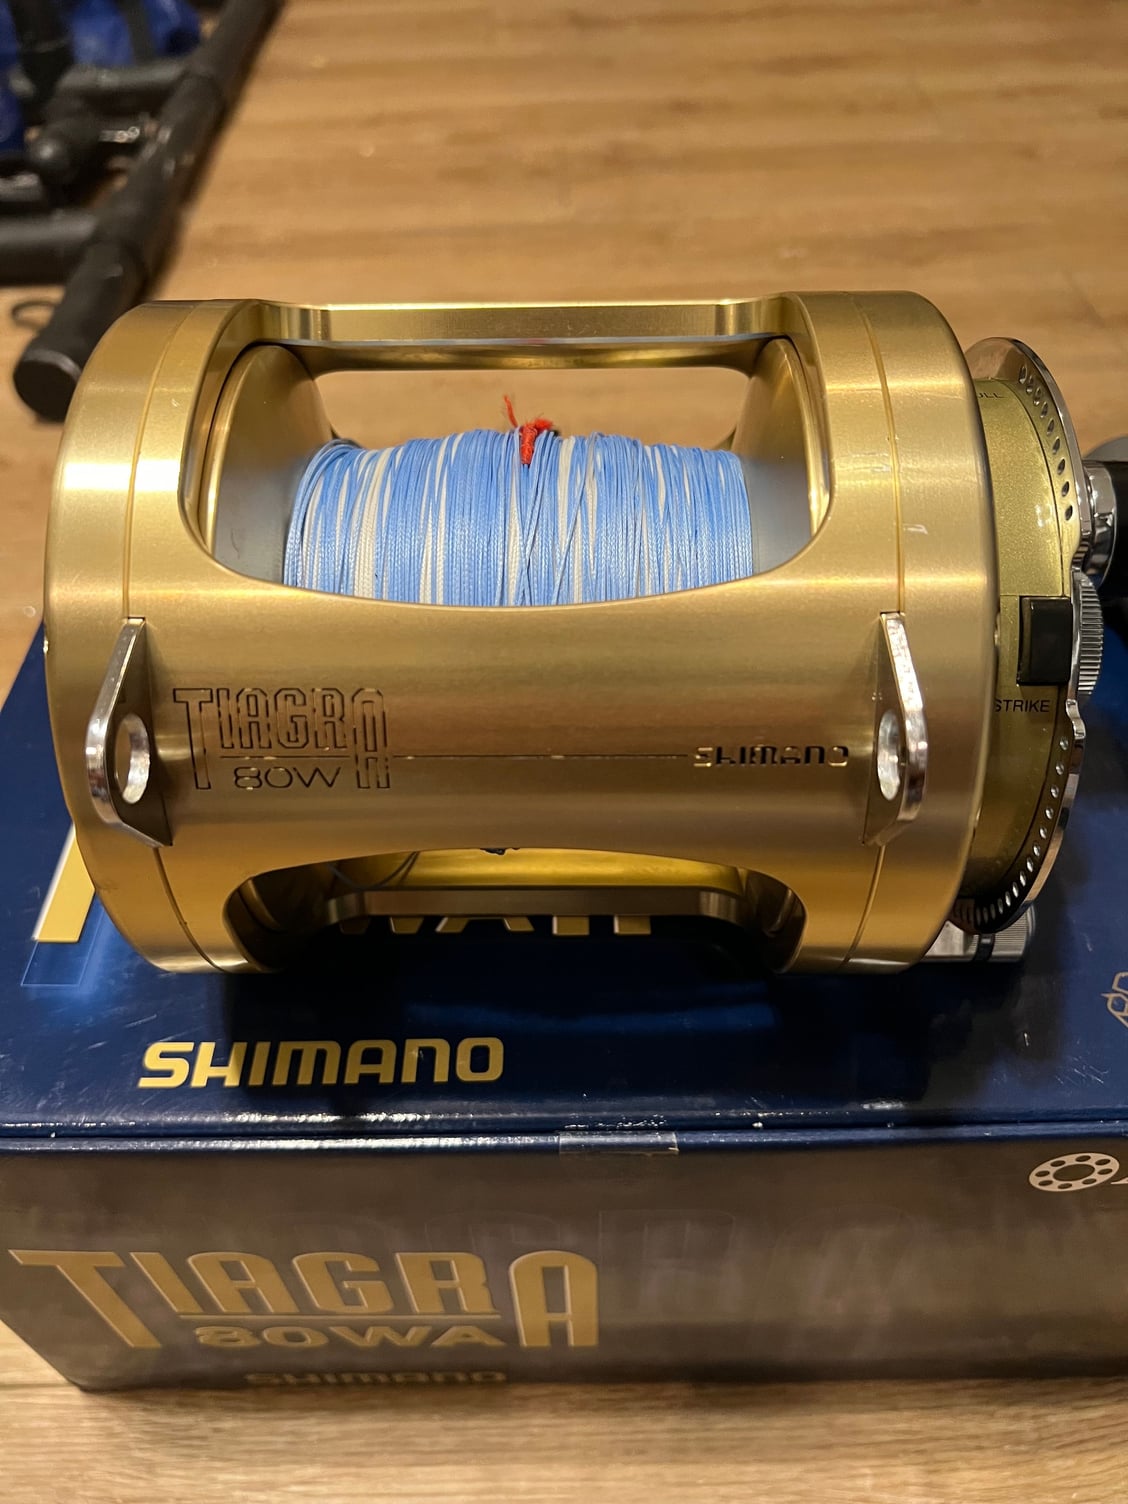 2) Shimano Tiagra 80w - The Hull Truth - Boating and Fishing Forum